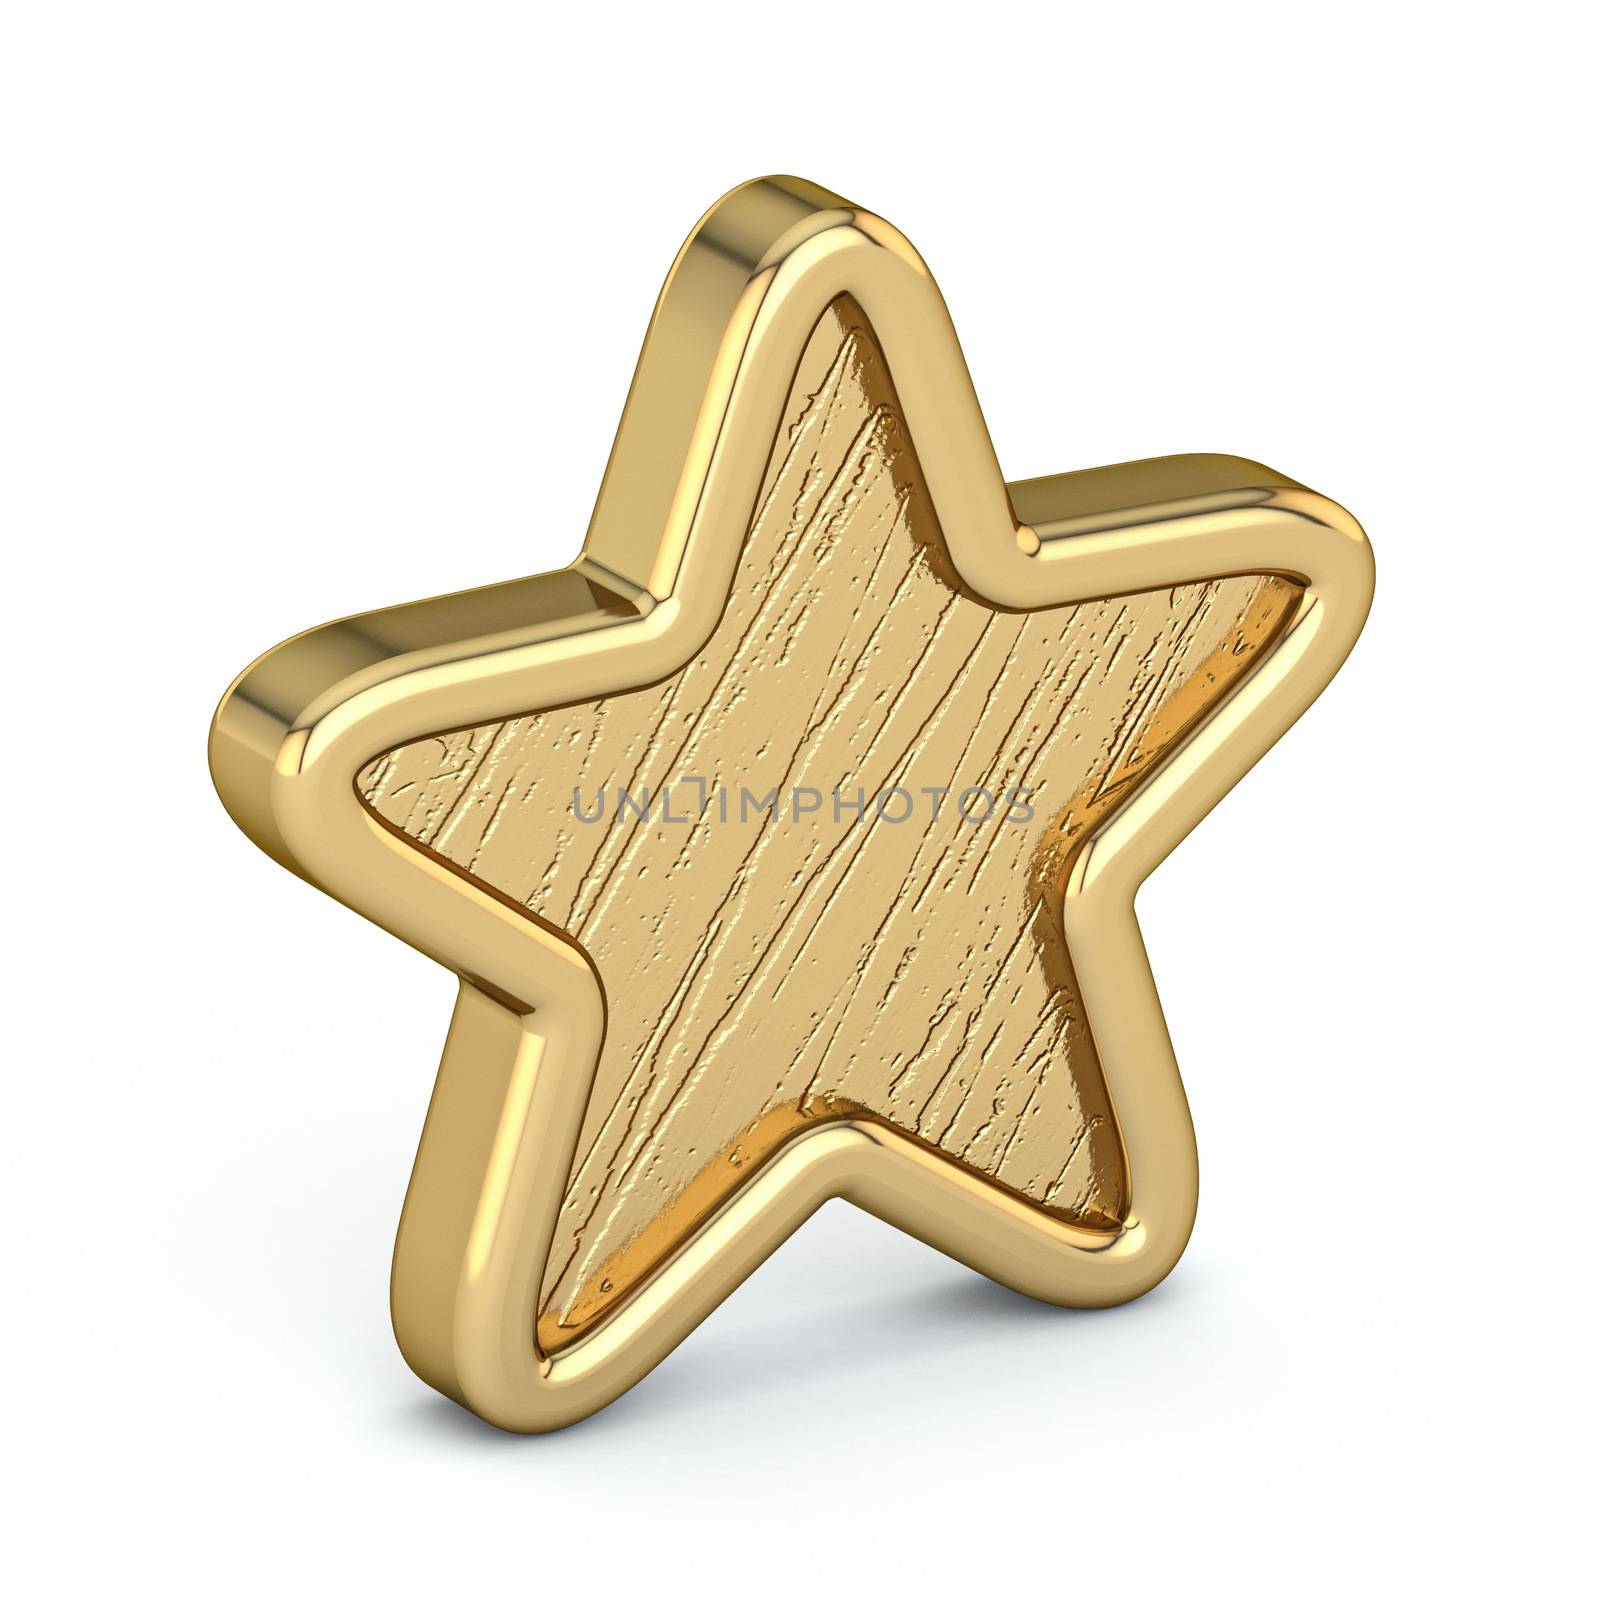 Golden star old, scratched 3D by djmilic